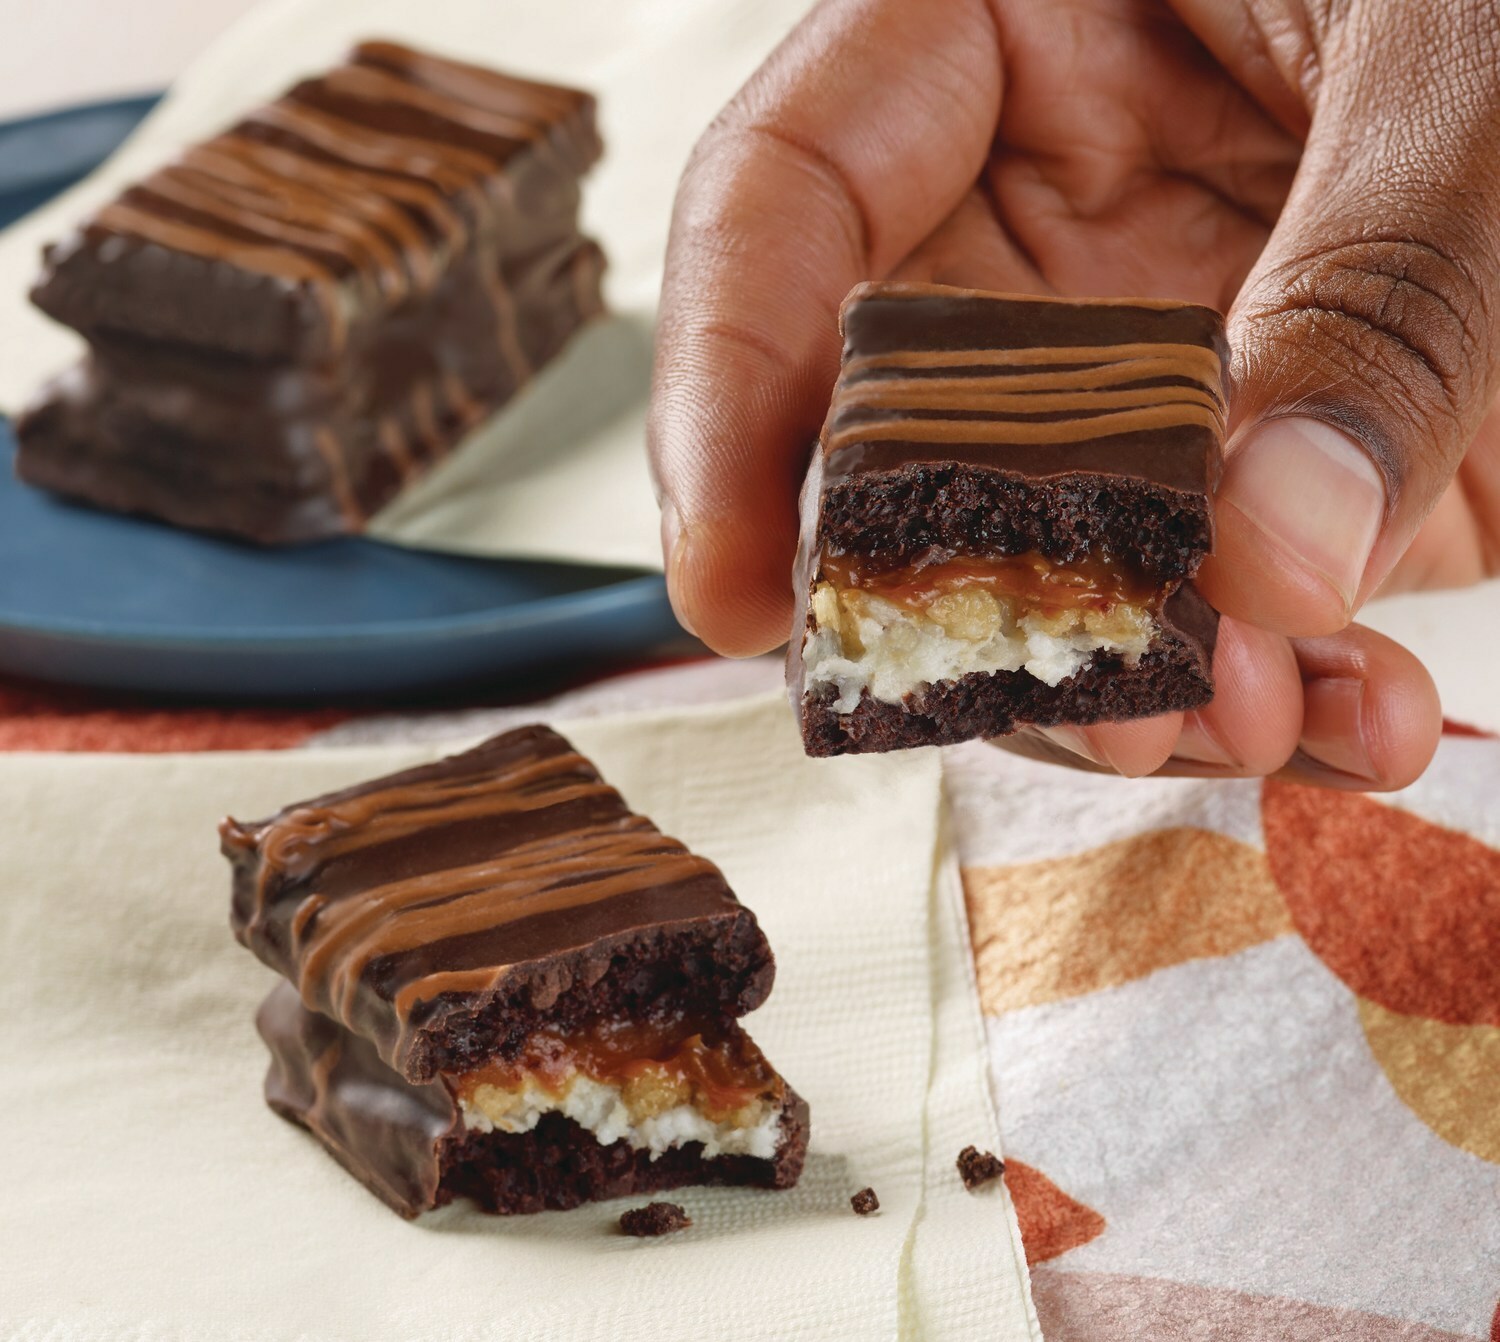 Hostess launches a new snack that combines candy bars and cake in a  six-layer treat 